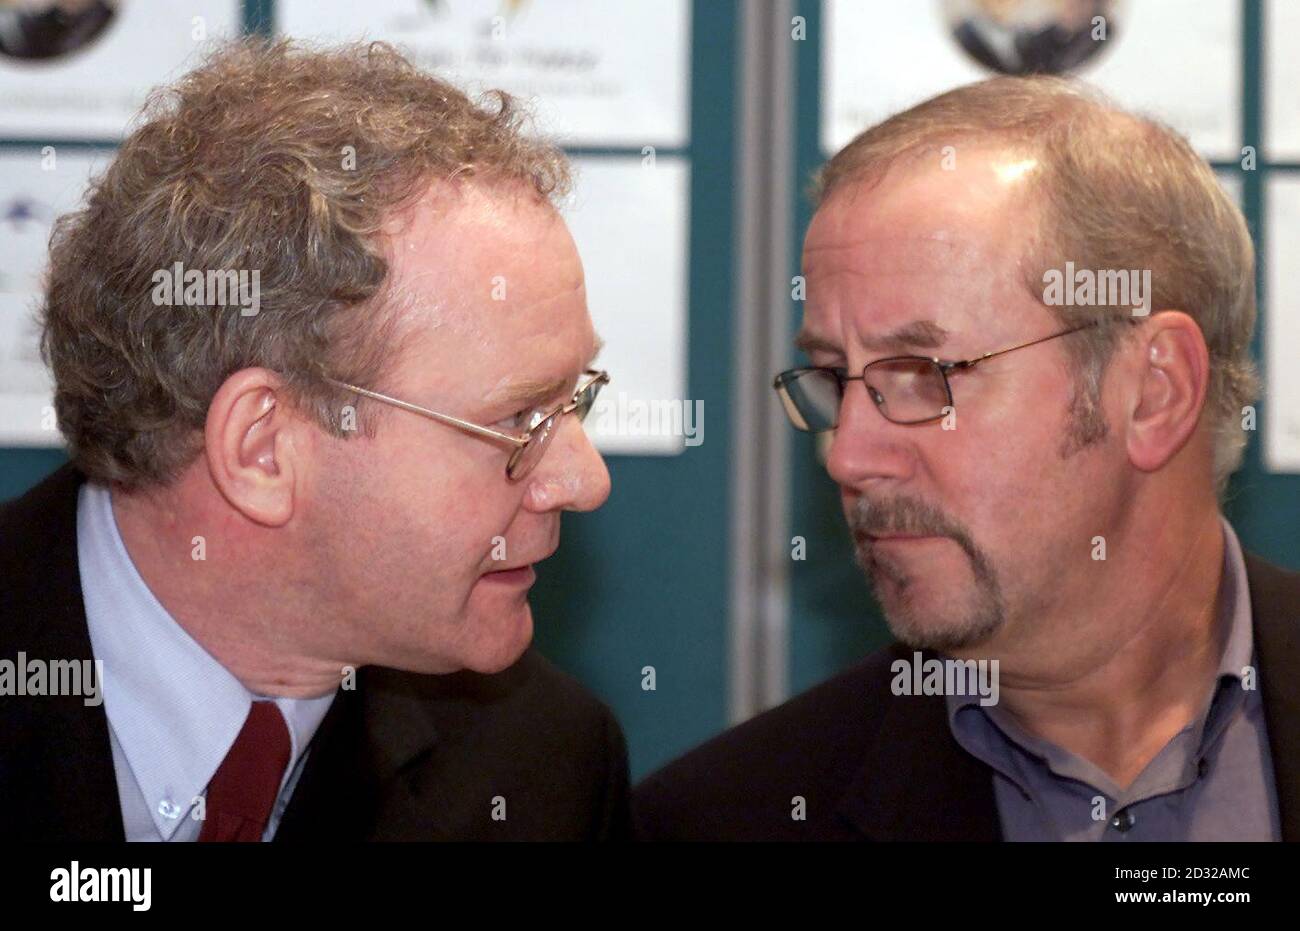 Northern Ireland Education Minister and Chief Negotiator of Sinn Fein  Martin McGuiness (left) meets Colin Parry at The Tim Parry Johnathan Ball Peace Centre in Warrington. The Parry's 12 year old son Tim was killed by an IRA bomb in Warrington.  * town centre in 1993 along with three year old Johnathan Ball. Stock Photo